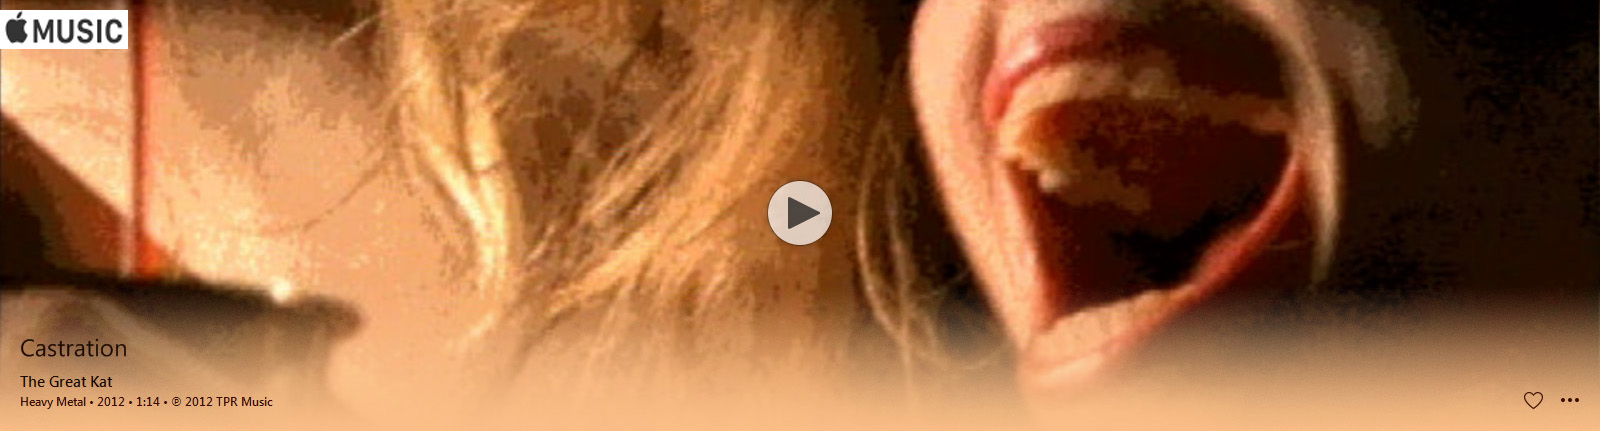 APPLE MUSIC is NOW STREAMING The Great Kat's "CASTRATION" MUSIC VIDEO!